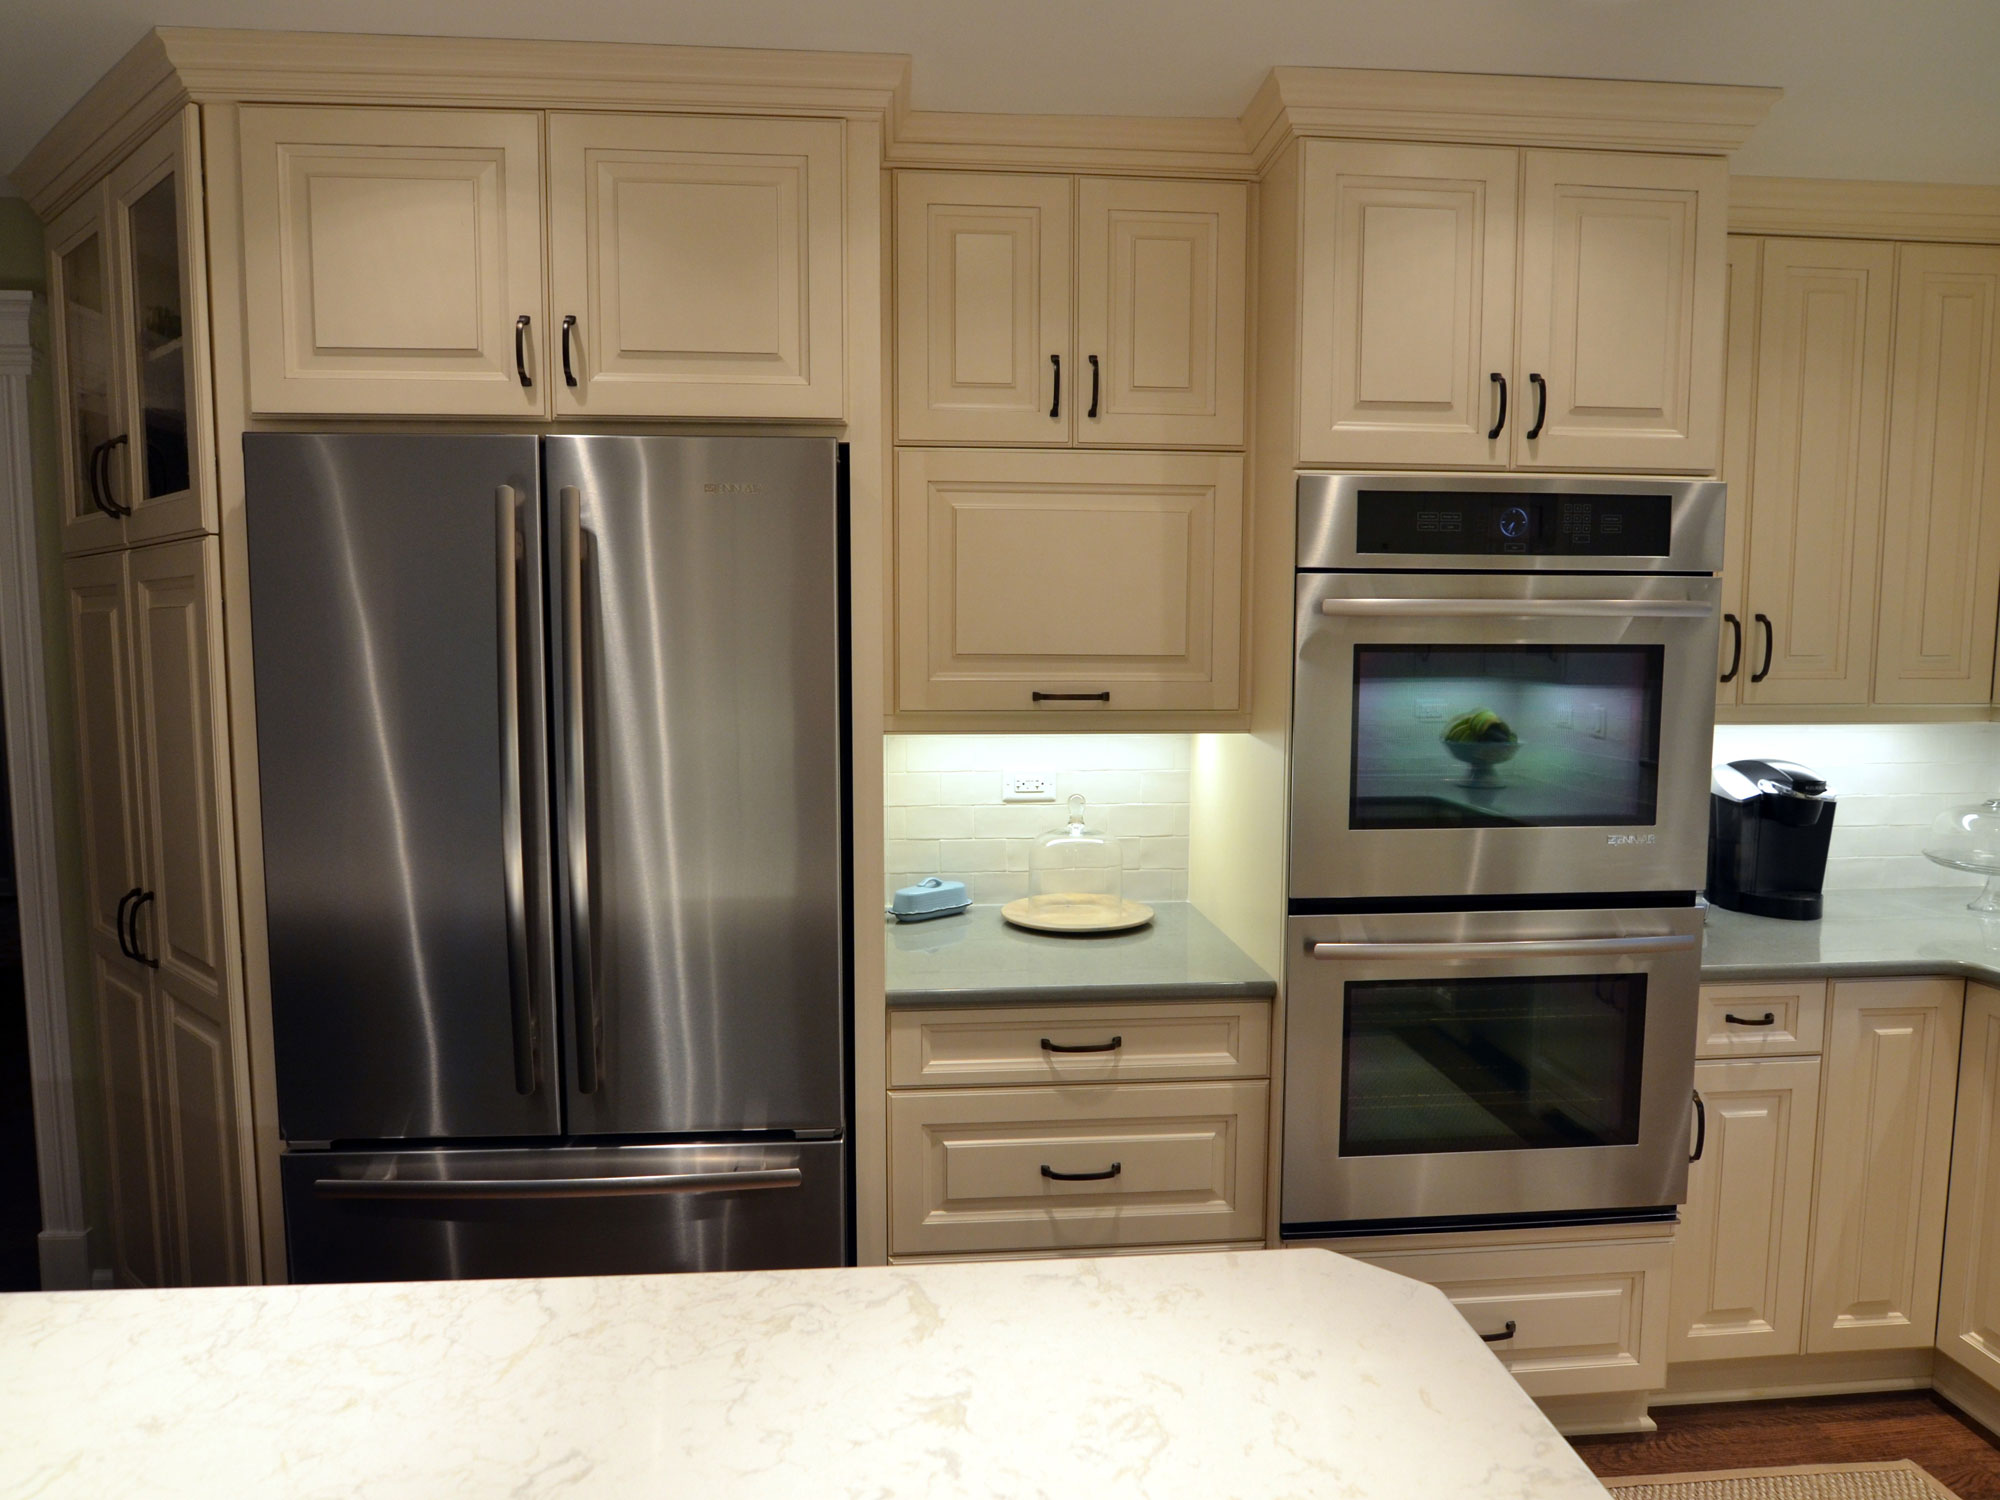 Kitchen remodeling in Naperville, IL. Home kitchen refrigerator and oven space after remodeling.